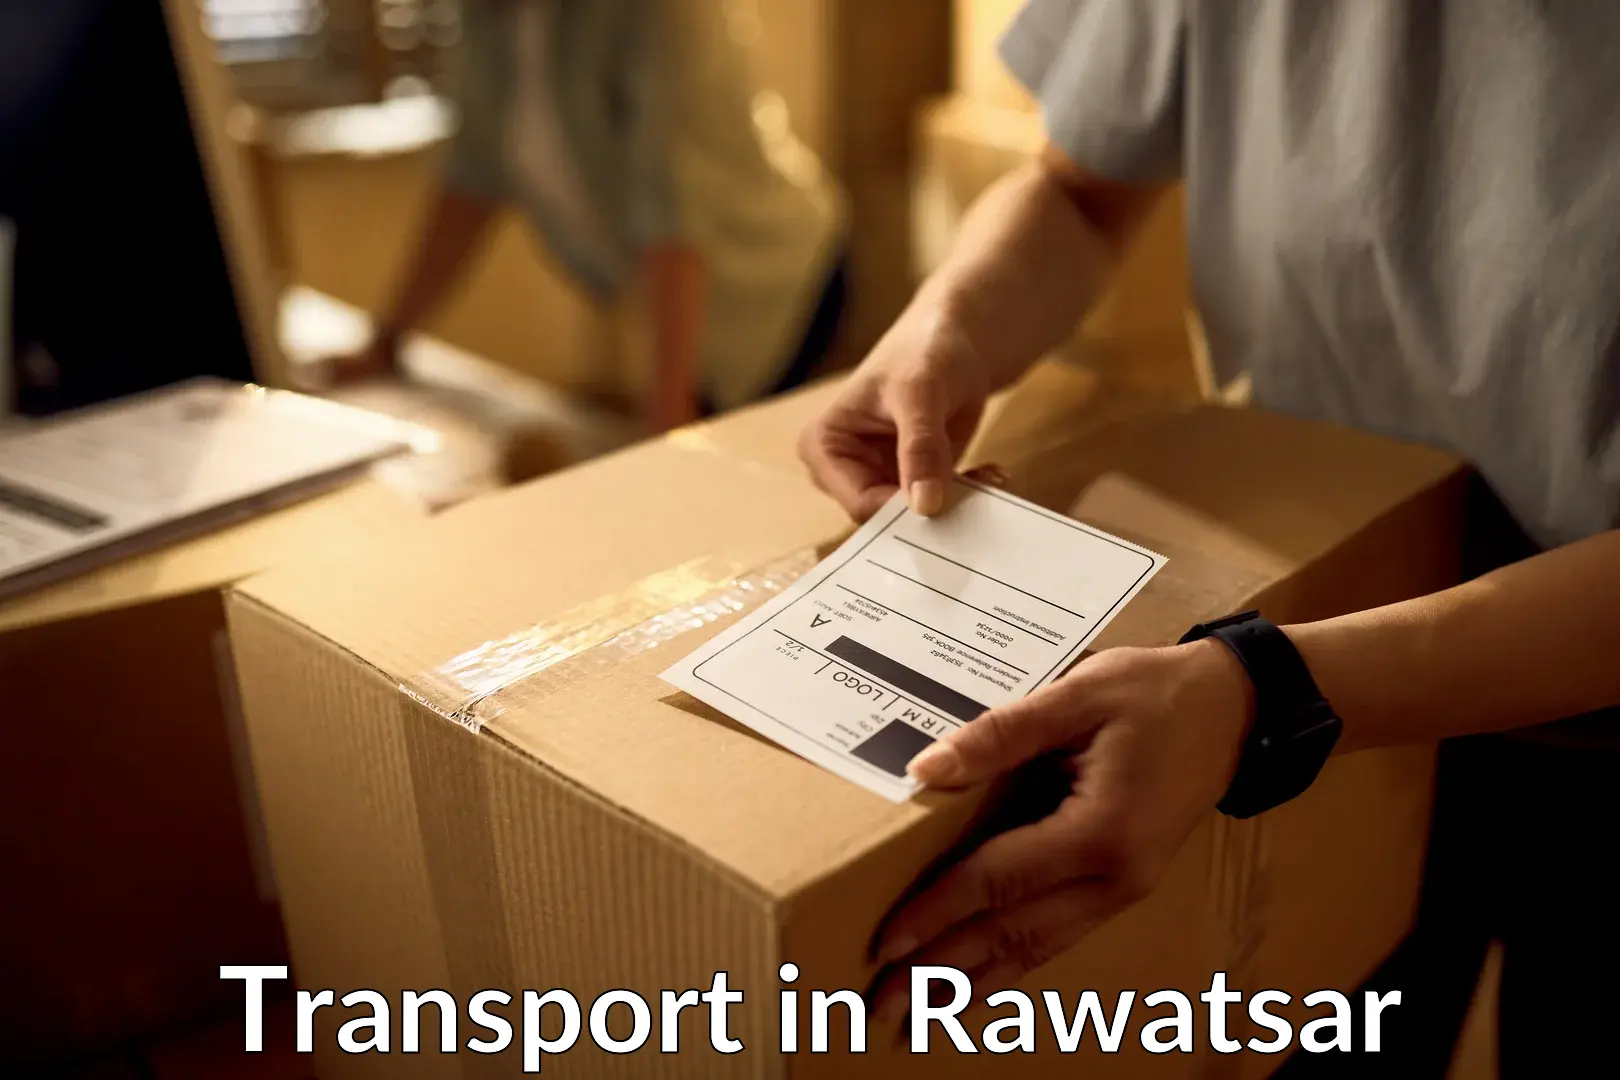 Nationwide transport services in Rawatsar